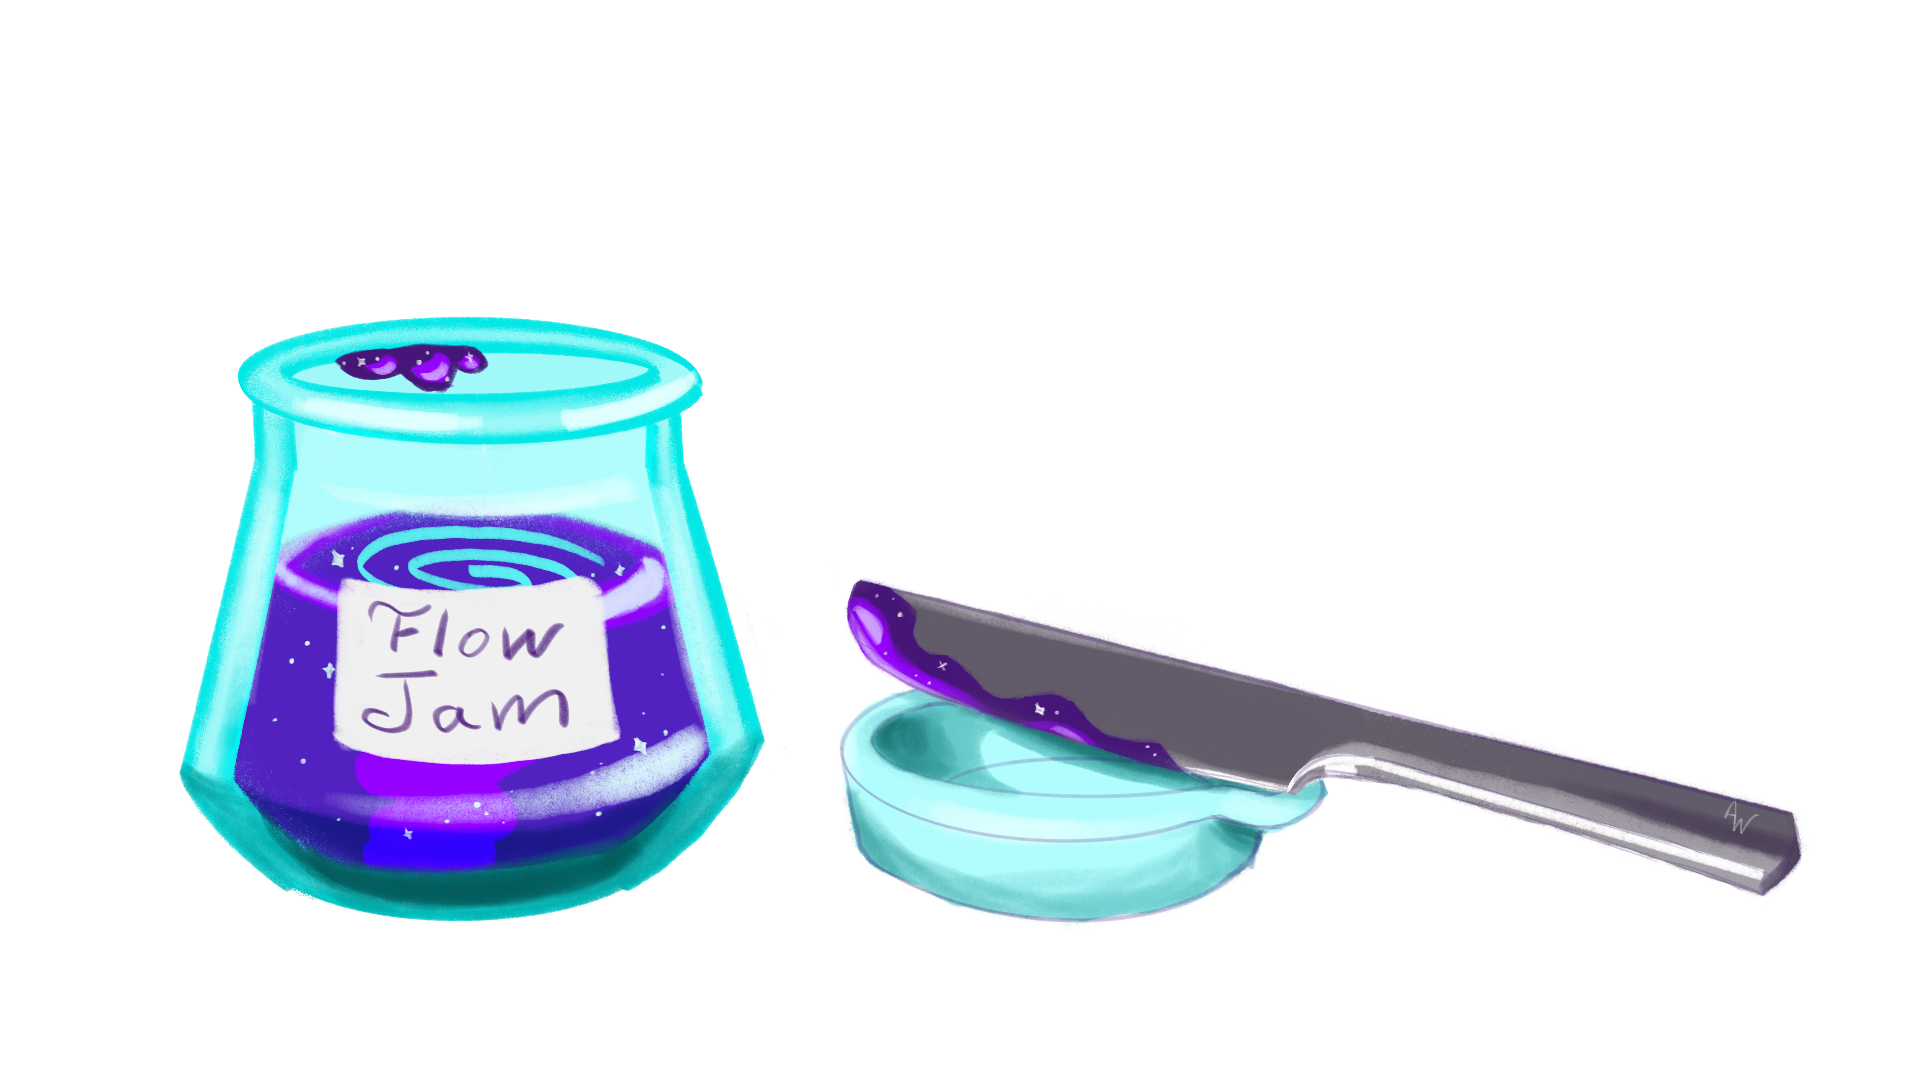 A jar of jam and a knife.